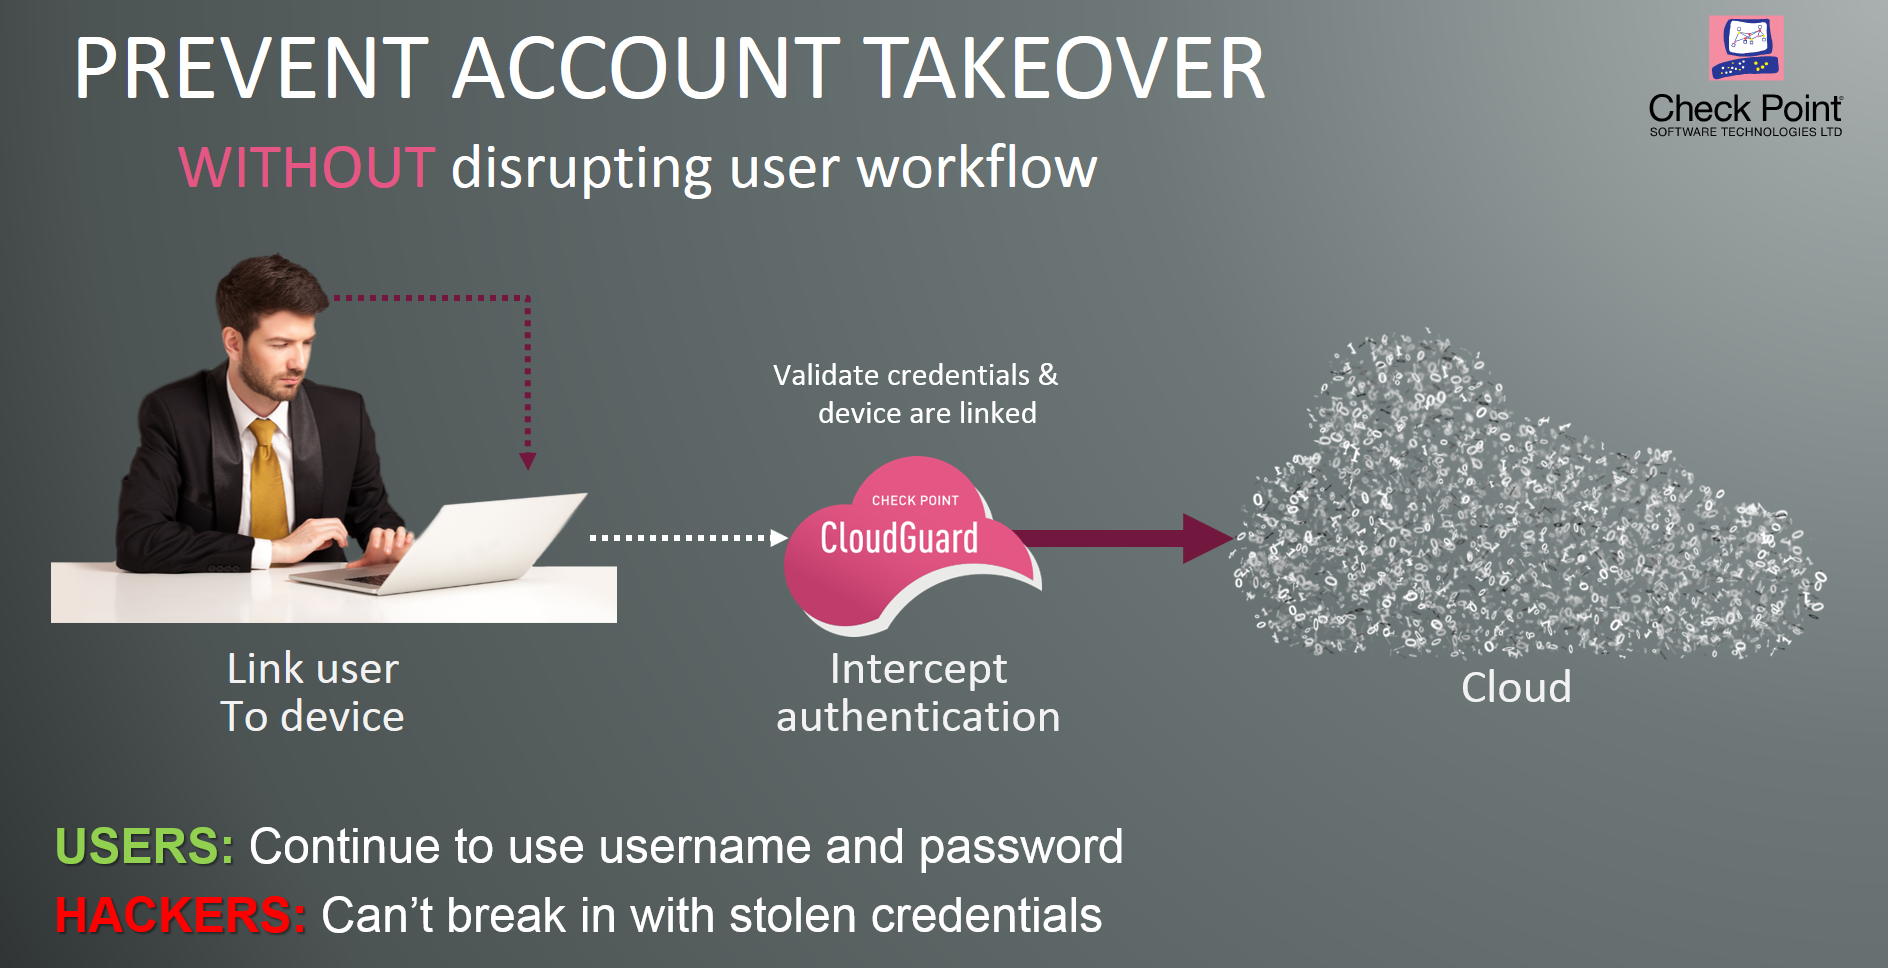 How our cyber security protects from account takeover user workflow